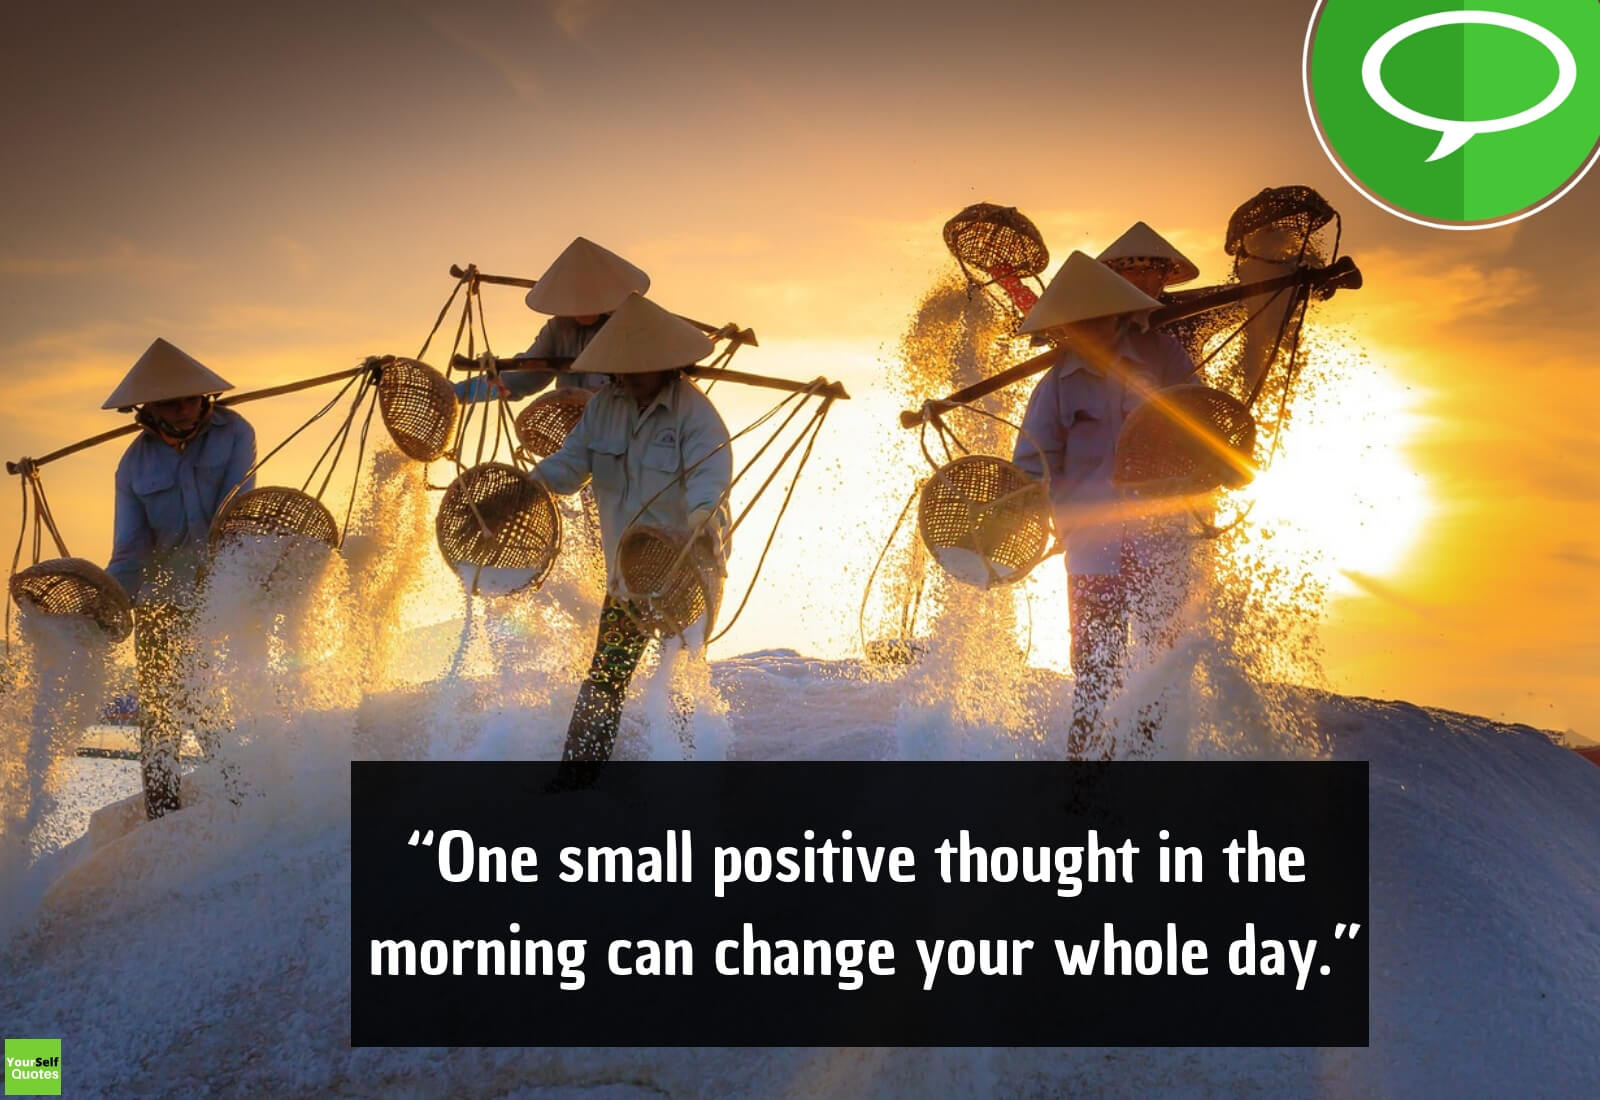 Positive Morning Quotes